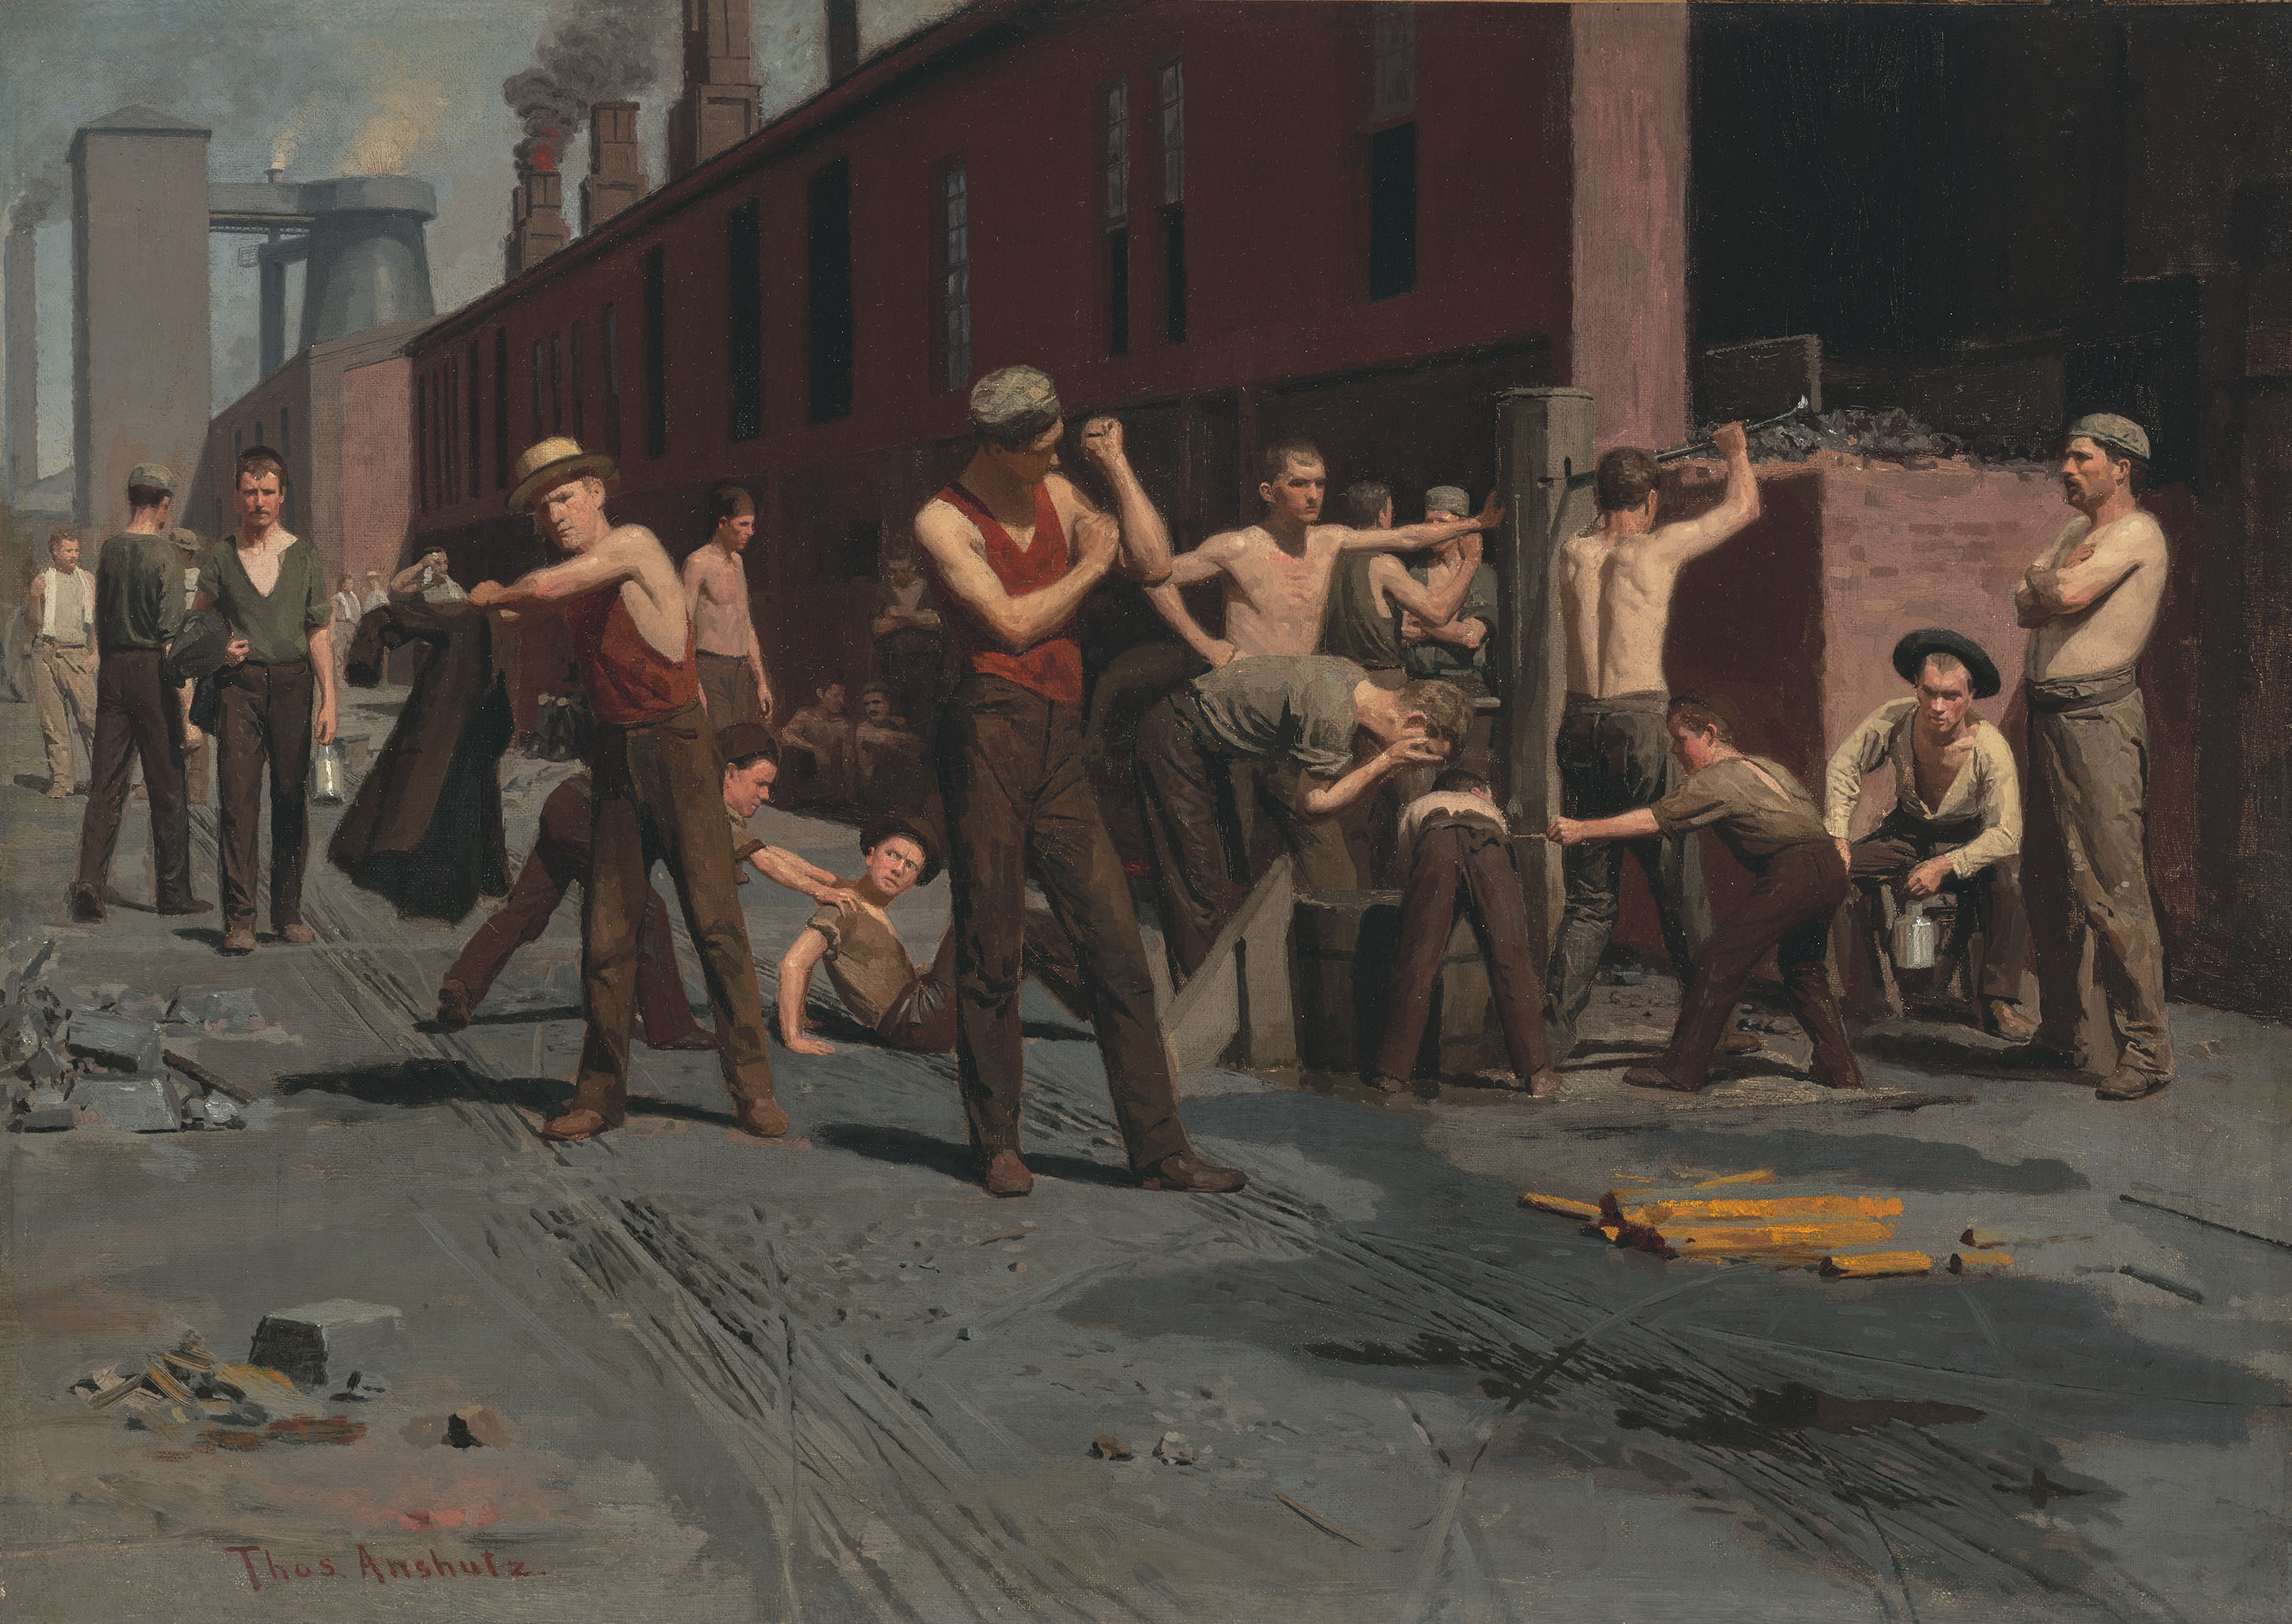 The Ironworkers' Noontime by Thomas Pollock Anshutz